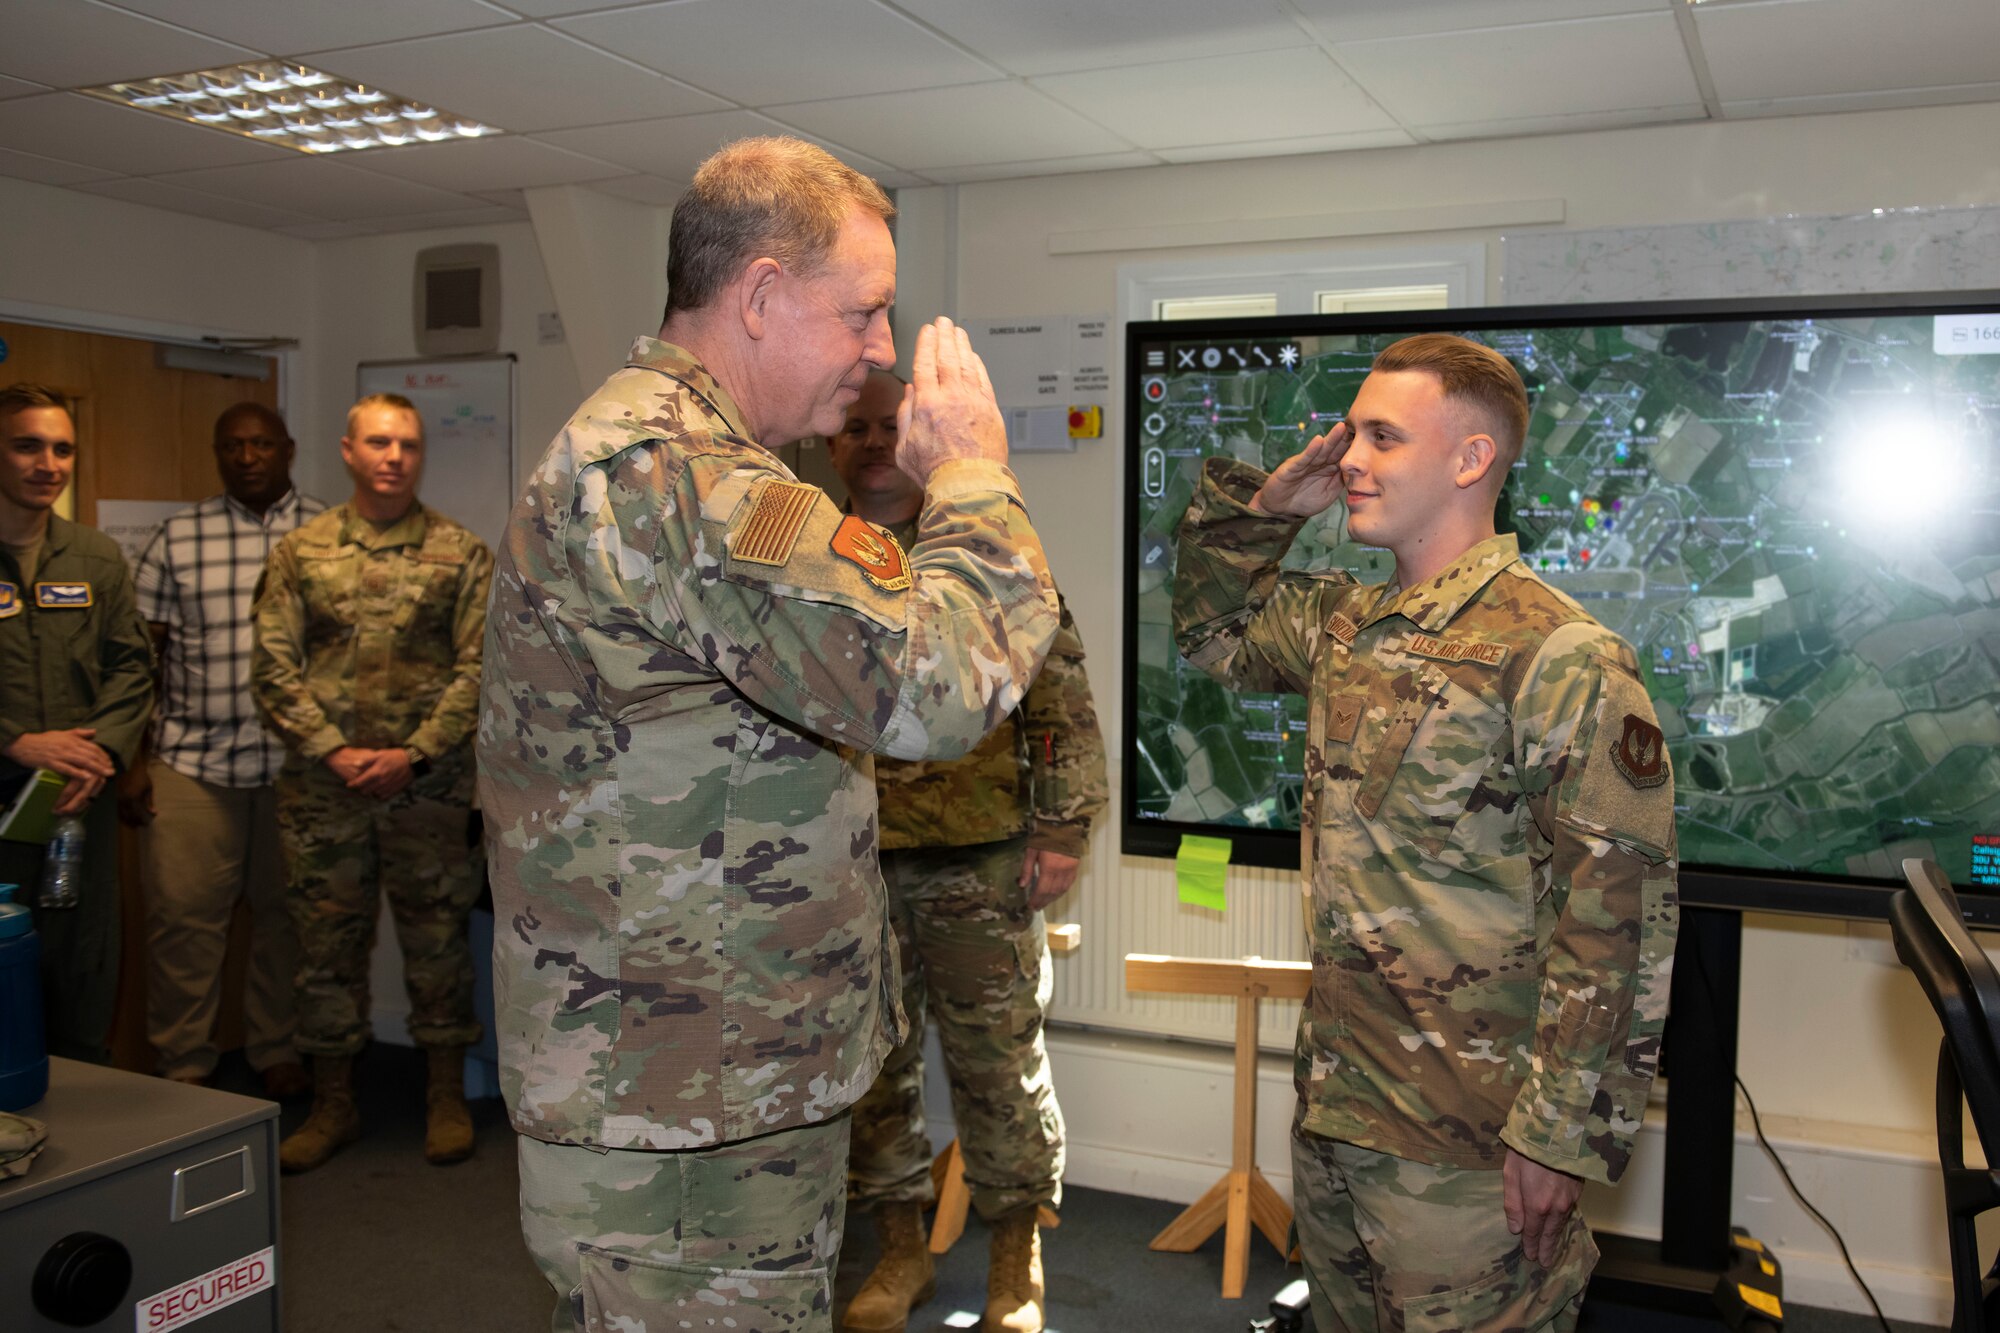 U.S. Air Force Gen. James B. Hecker, left, U.S. Air Forces in Europe and Air Forces Africa commander, recognizes Airman 1st Class Joshua Svoboda, right, 420th Expeditionary Air Base Squadron water and fuel systems apprentice, at Royal Air Force Fairford, England, July, 18, 2022. During his first visit to the 501st Combat Support Wing as the USAFE-AFAFRICA commander, Hecker met with several Airmen and received briefings about the wing’s mission and capabilities. (U.S. Air Force photo by Senior Airman Jennifer Zima)